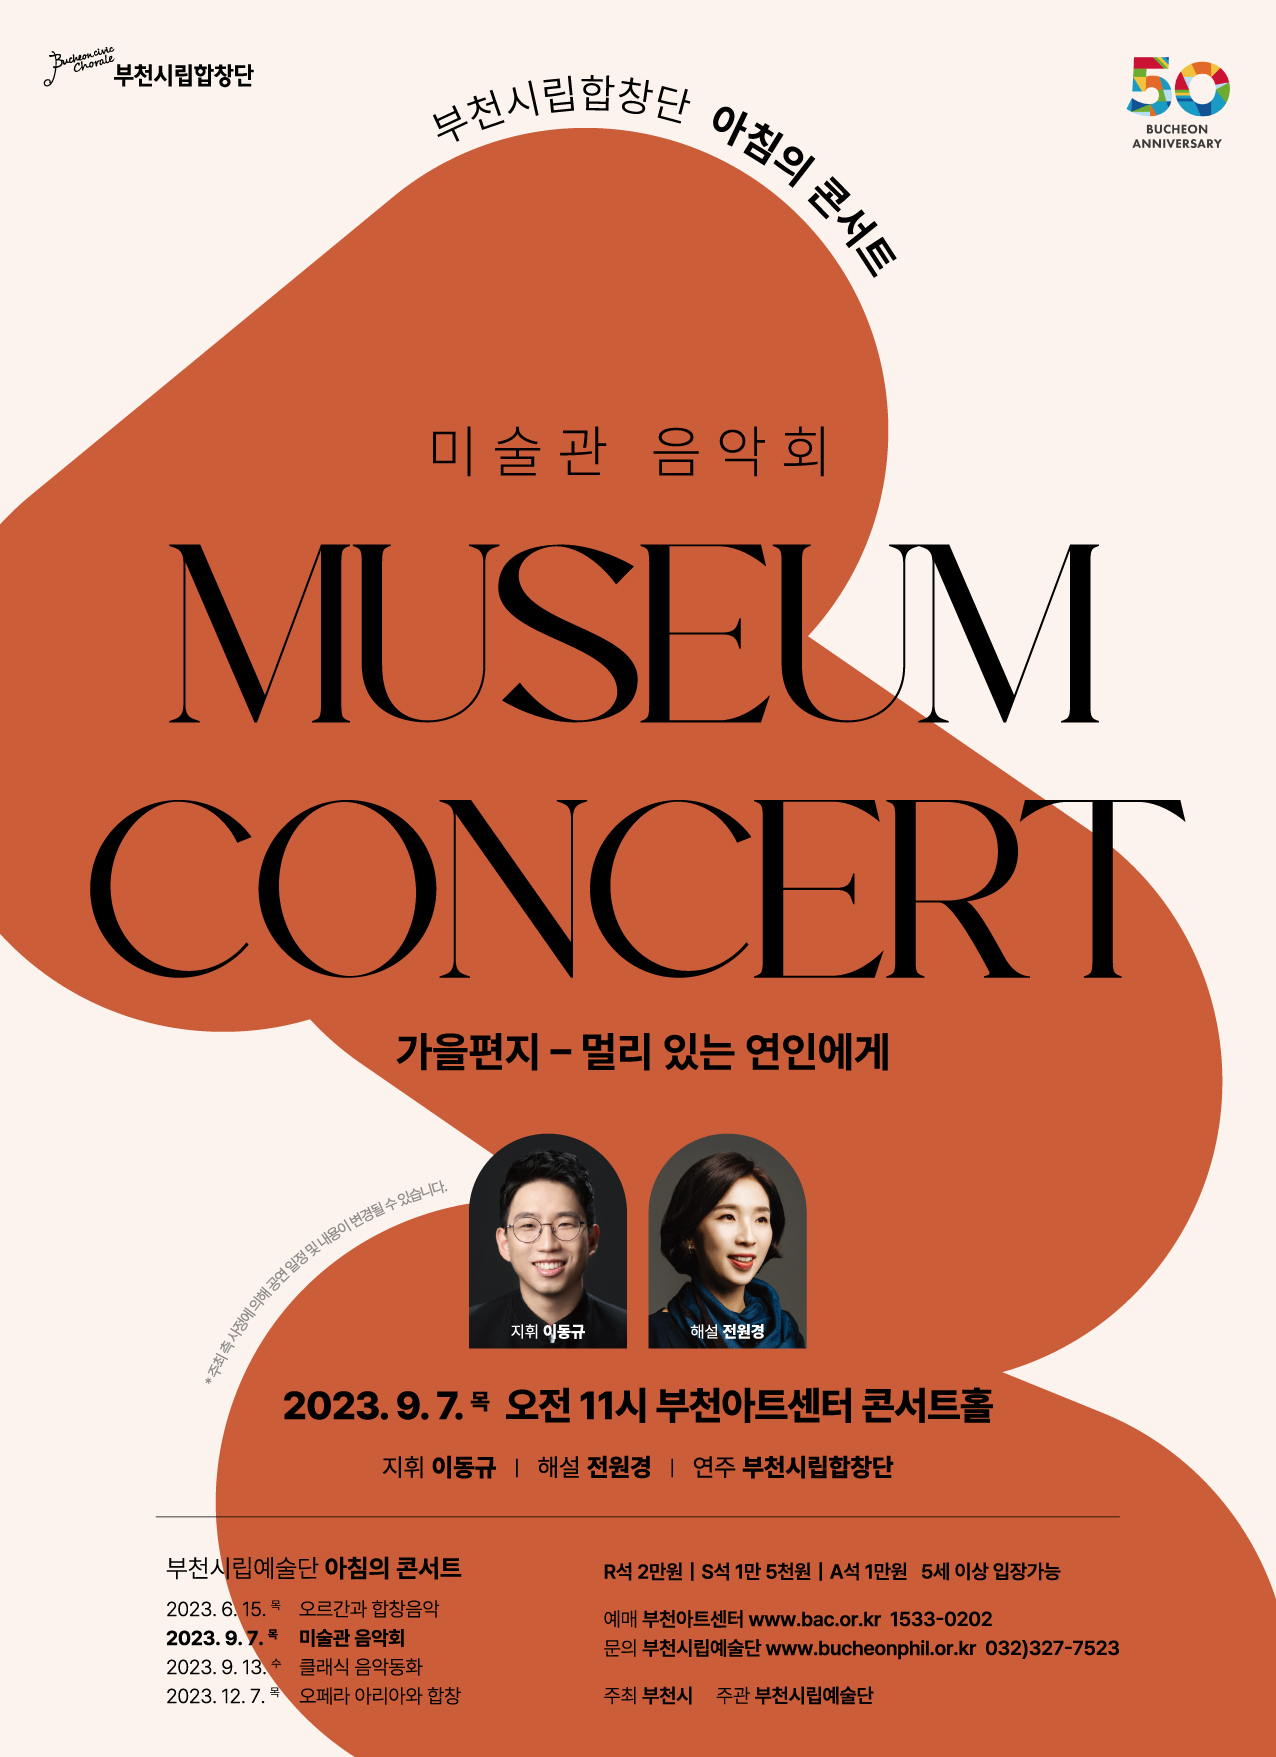 [9.7]Bucheon Civic Chorale Morning Concert - Museum Concert